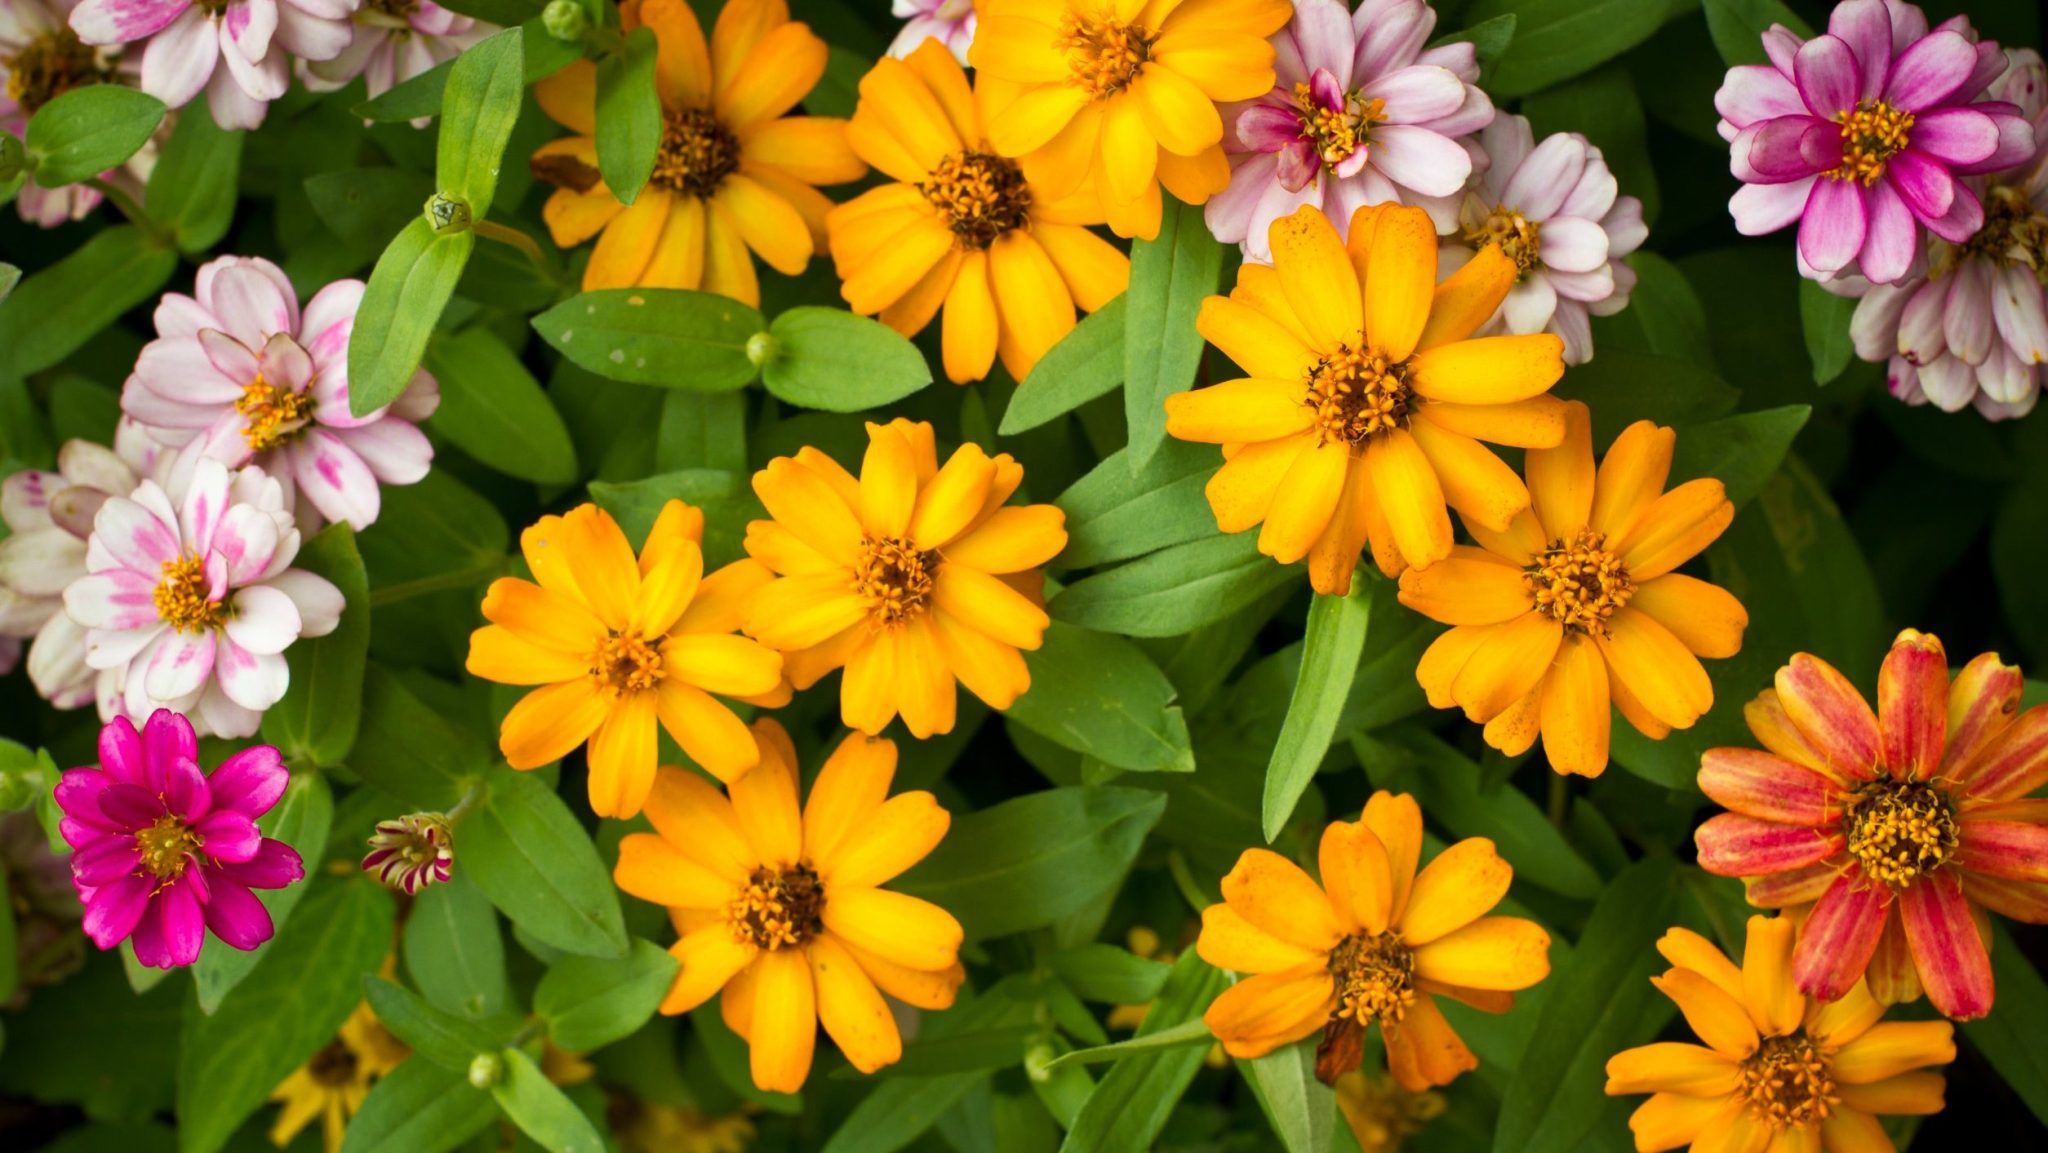 Are Zinnias Poisonous to Dogs? Find Out the Top 5 Reasons Why Dogs Eat